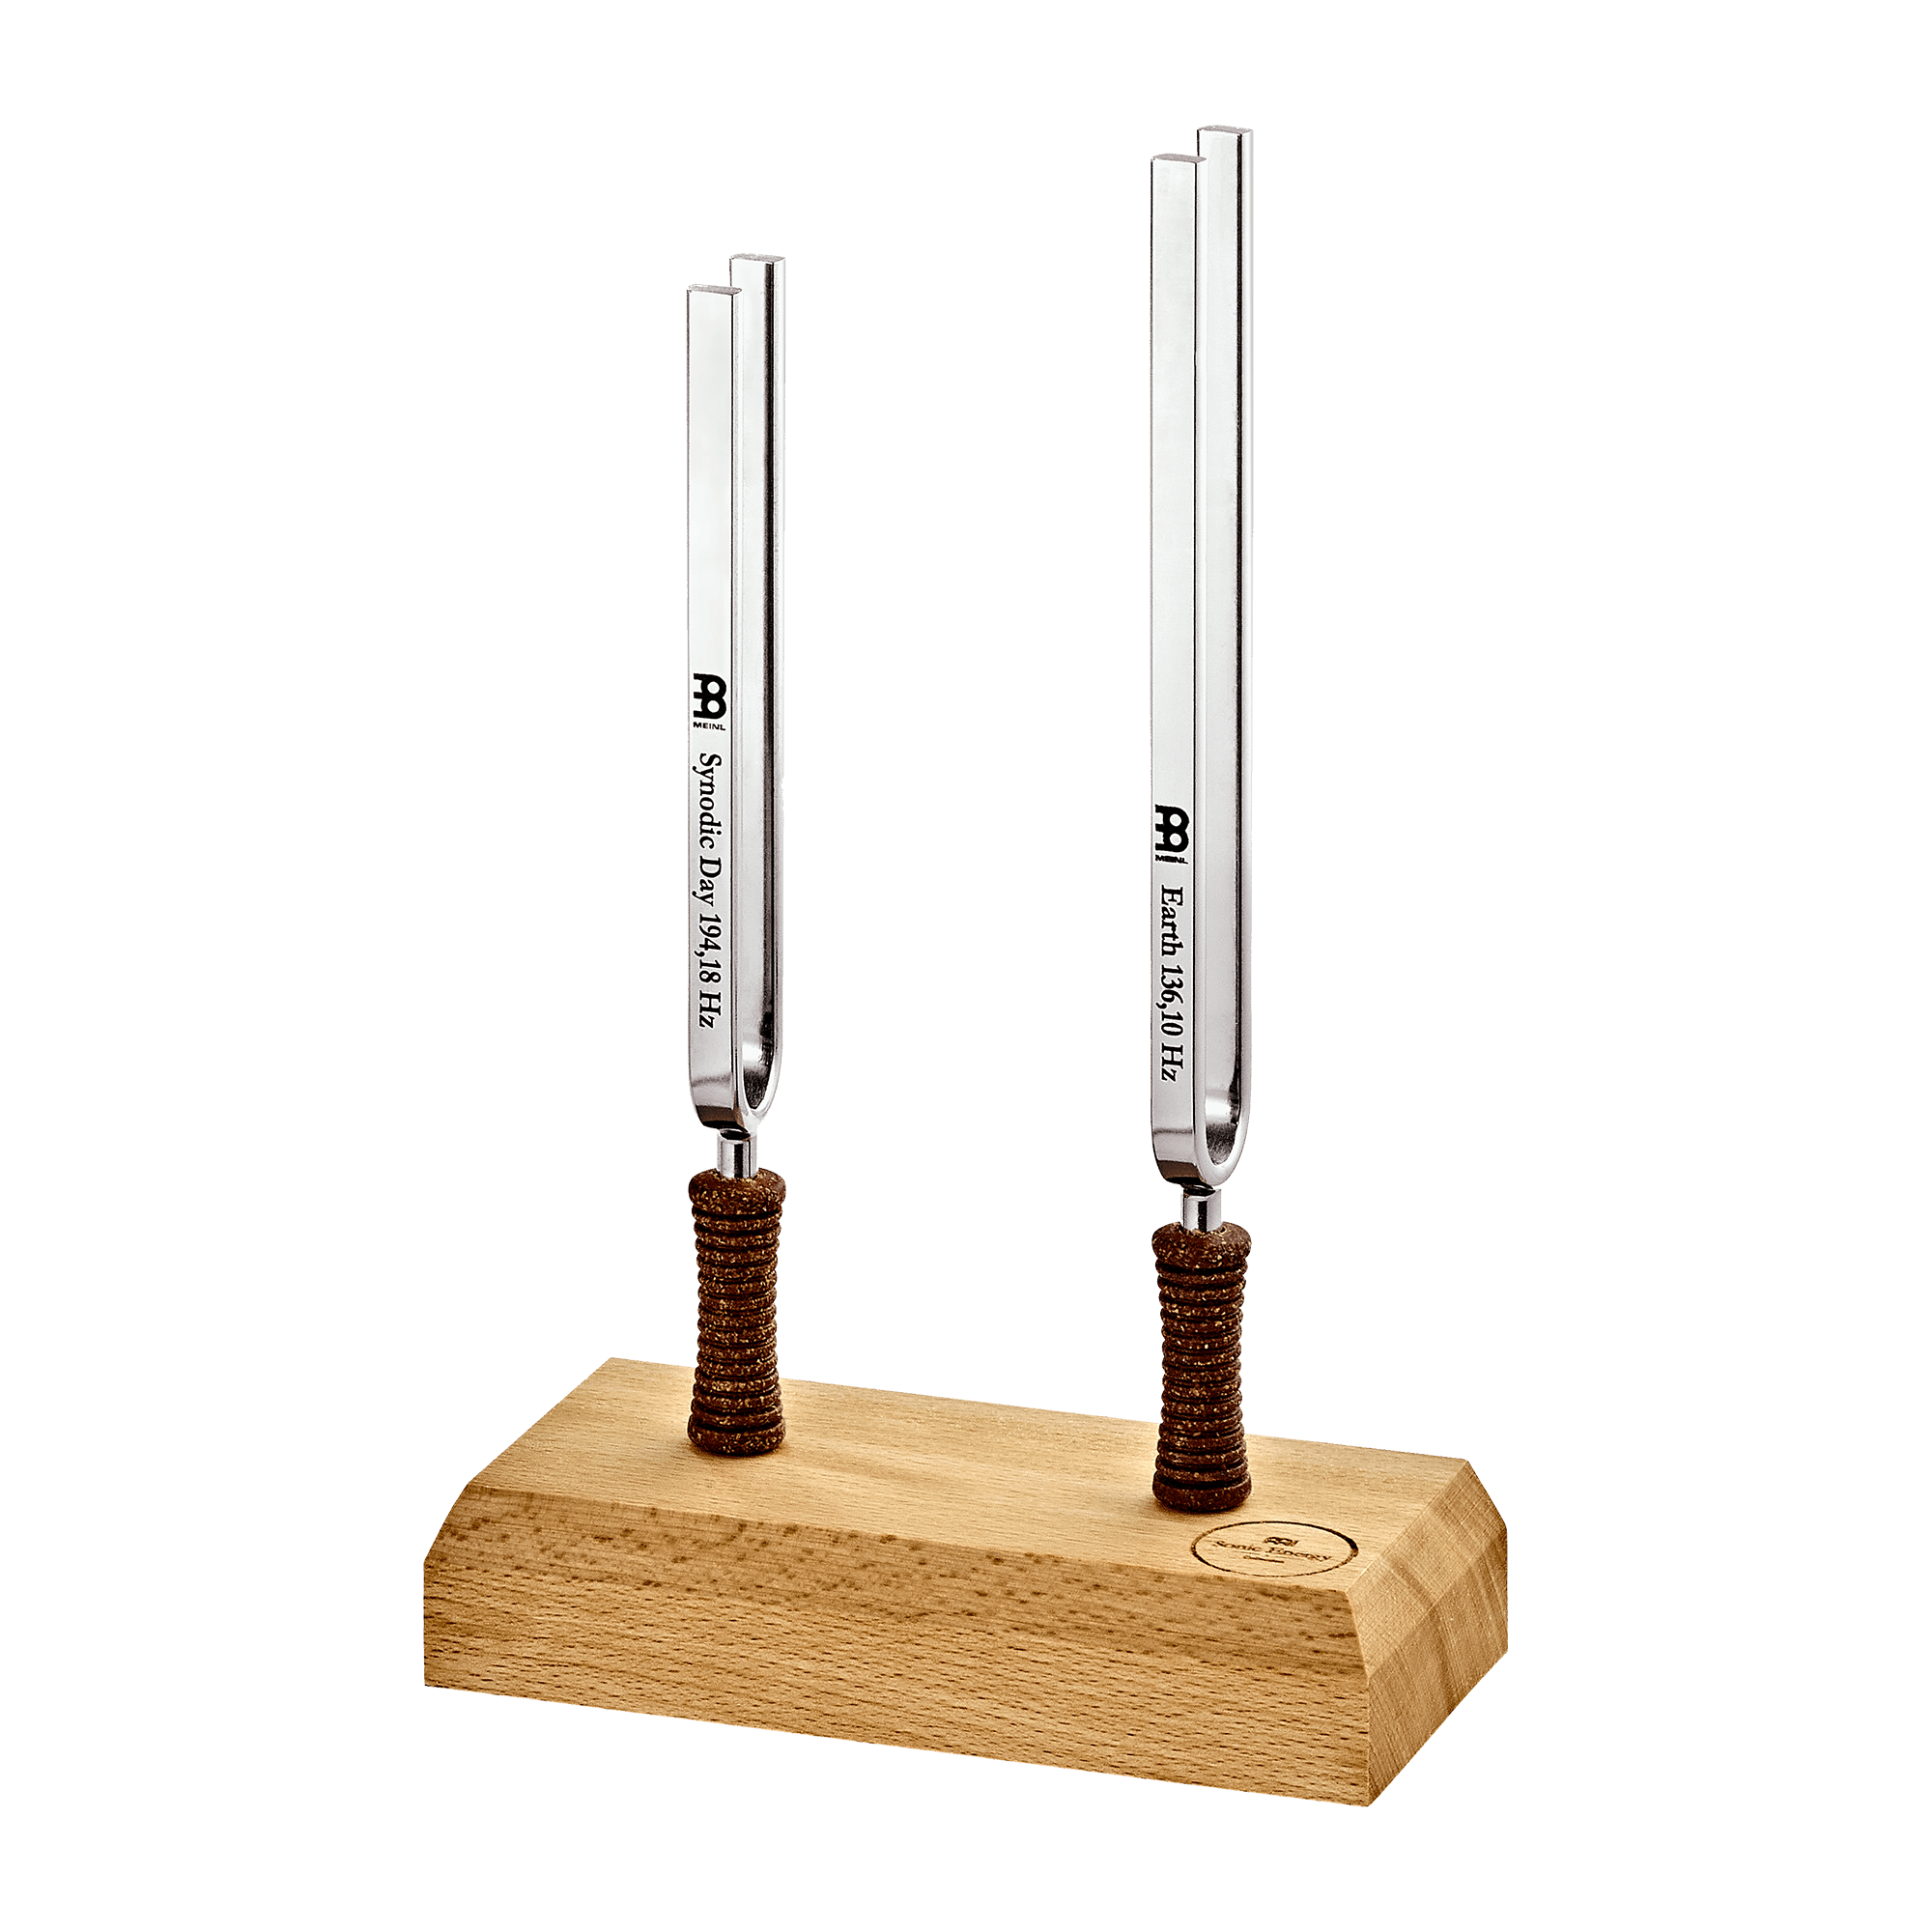 Planetary Tuning Fork Day and Night Set of 2 - Planetary Tuned Tuning Forks